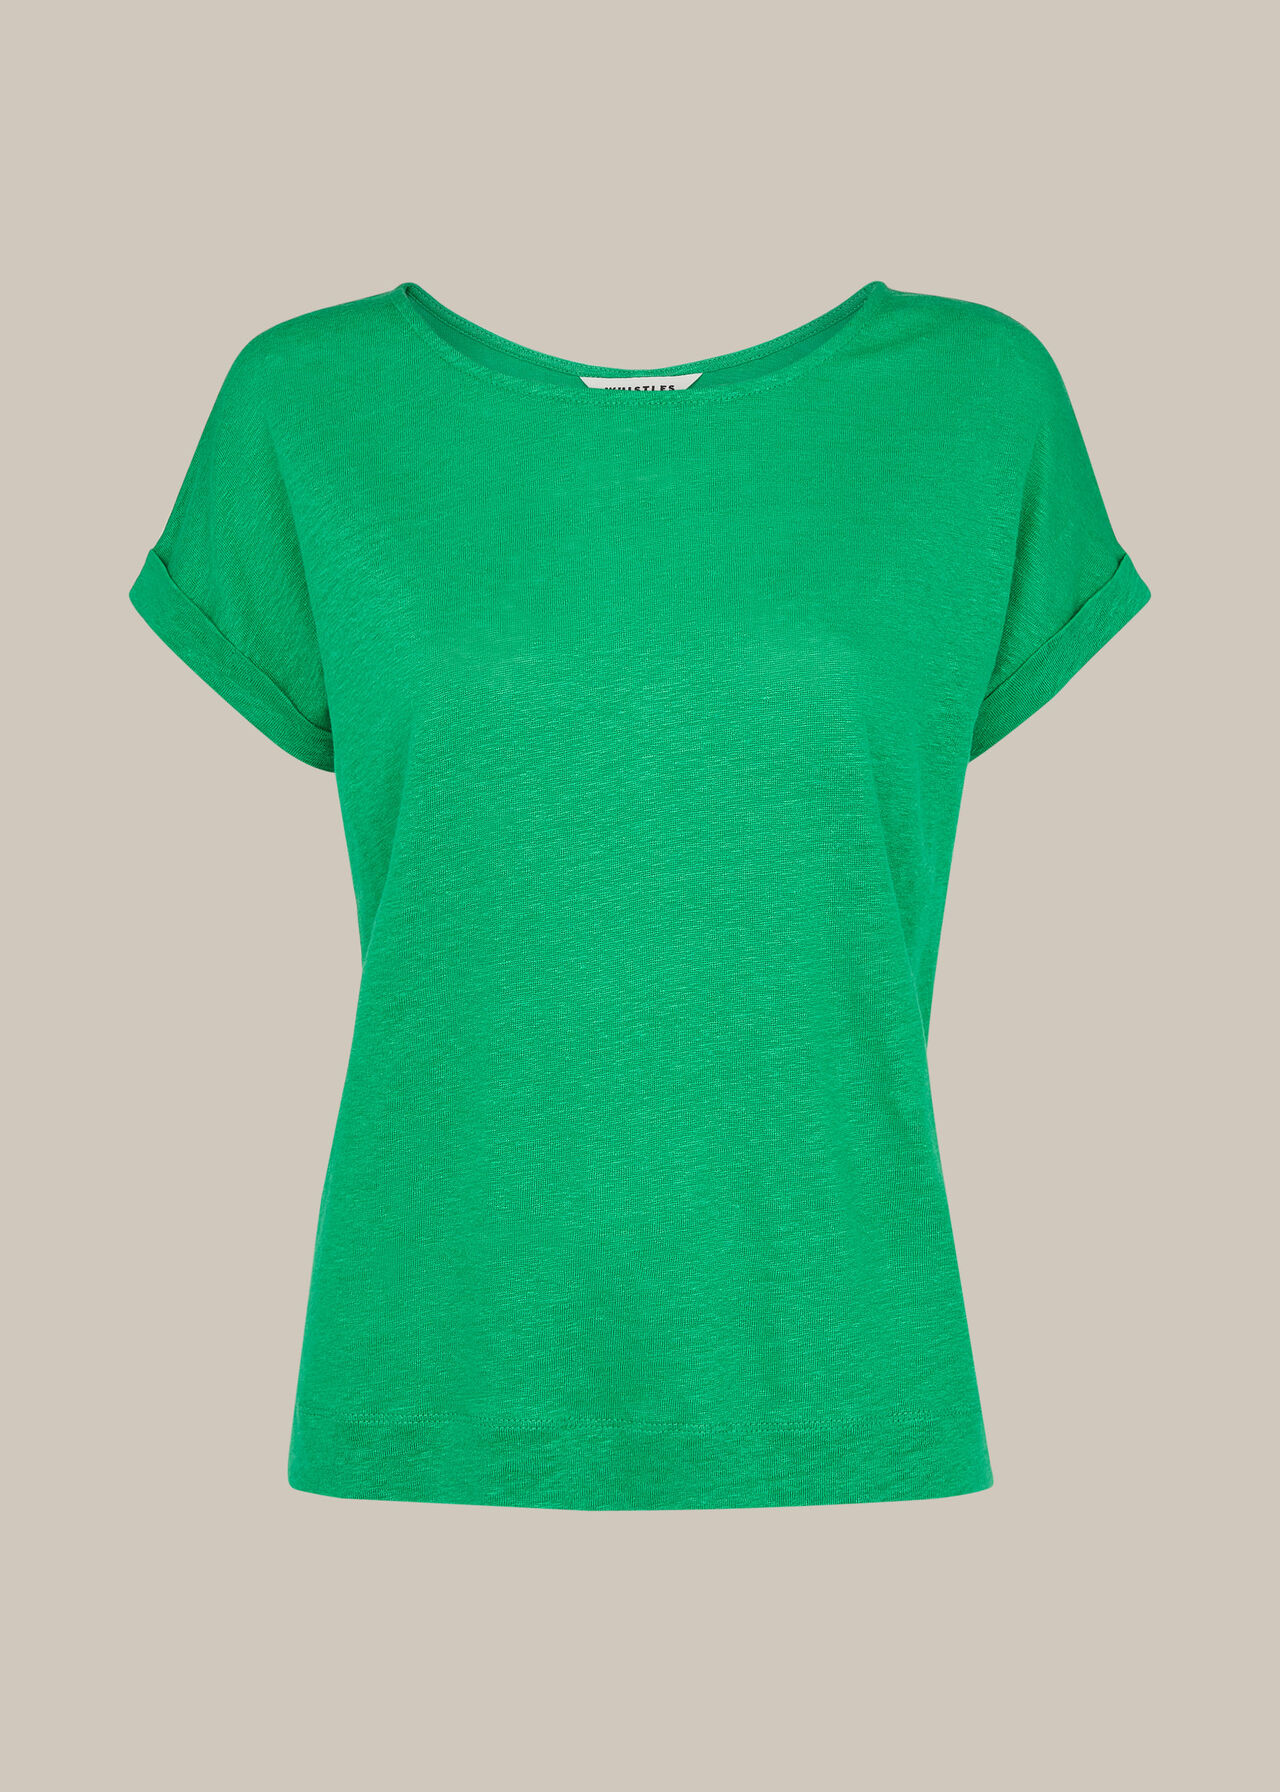 Green Relaxed Linen Tshirt | WHISTLES